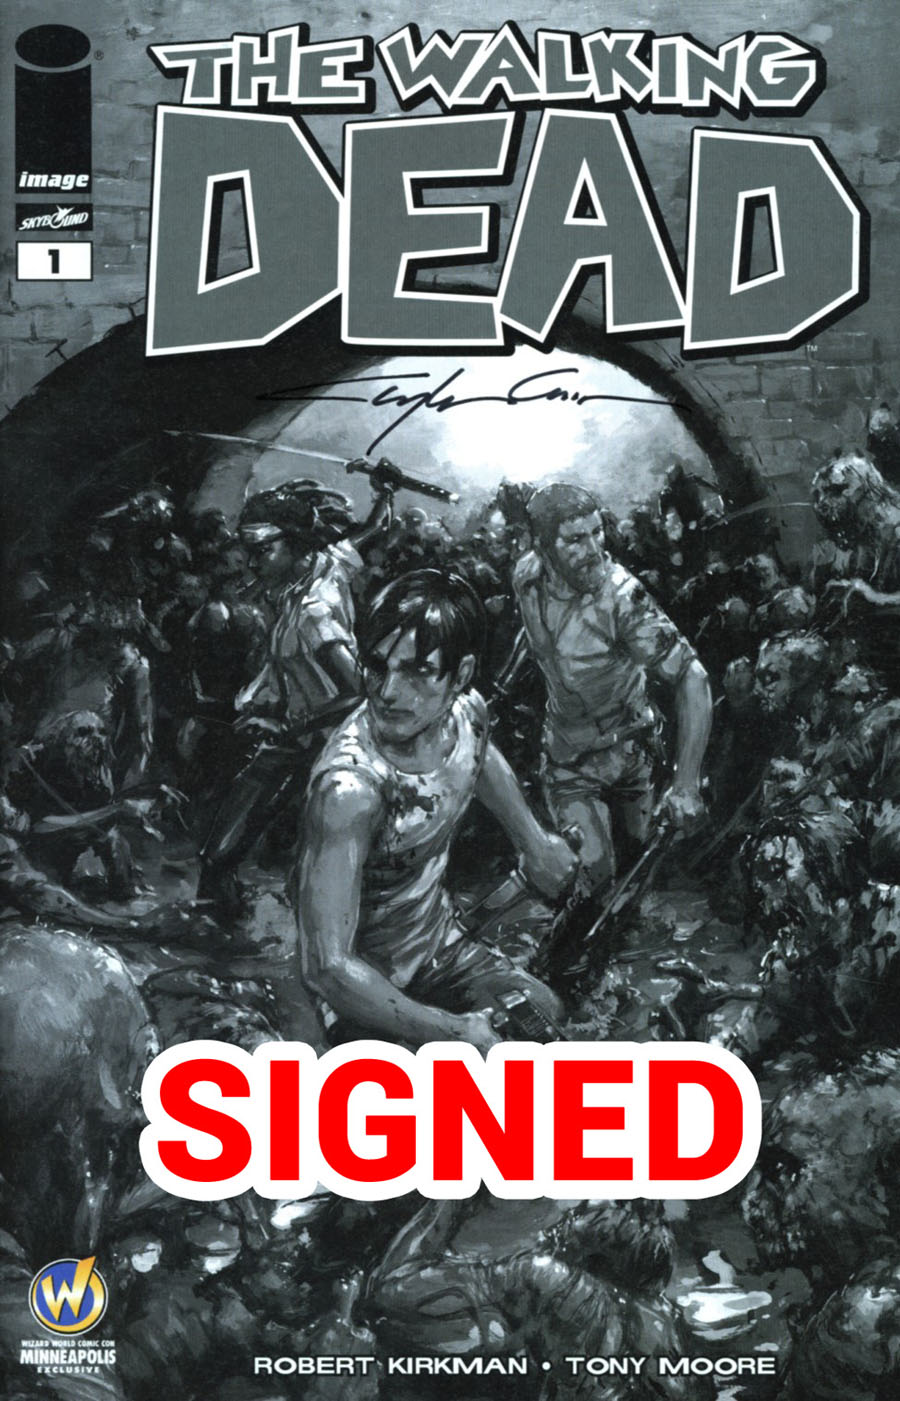 Walking Dead #1 Cover Z-I Wizard World Comic Con Minneapolis VIP Exclusive Clayton Crain Sketch Variant Cover Signed By Clayton Crain